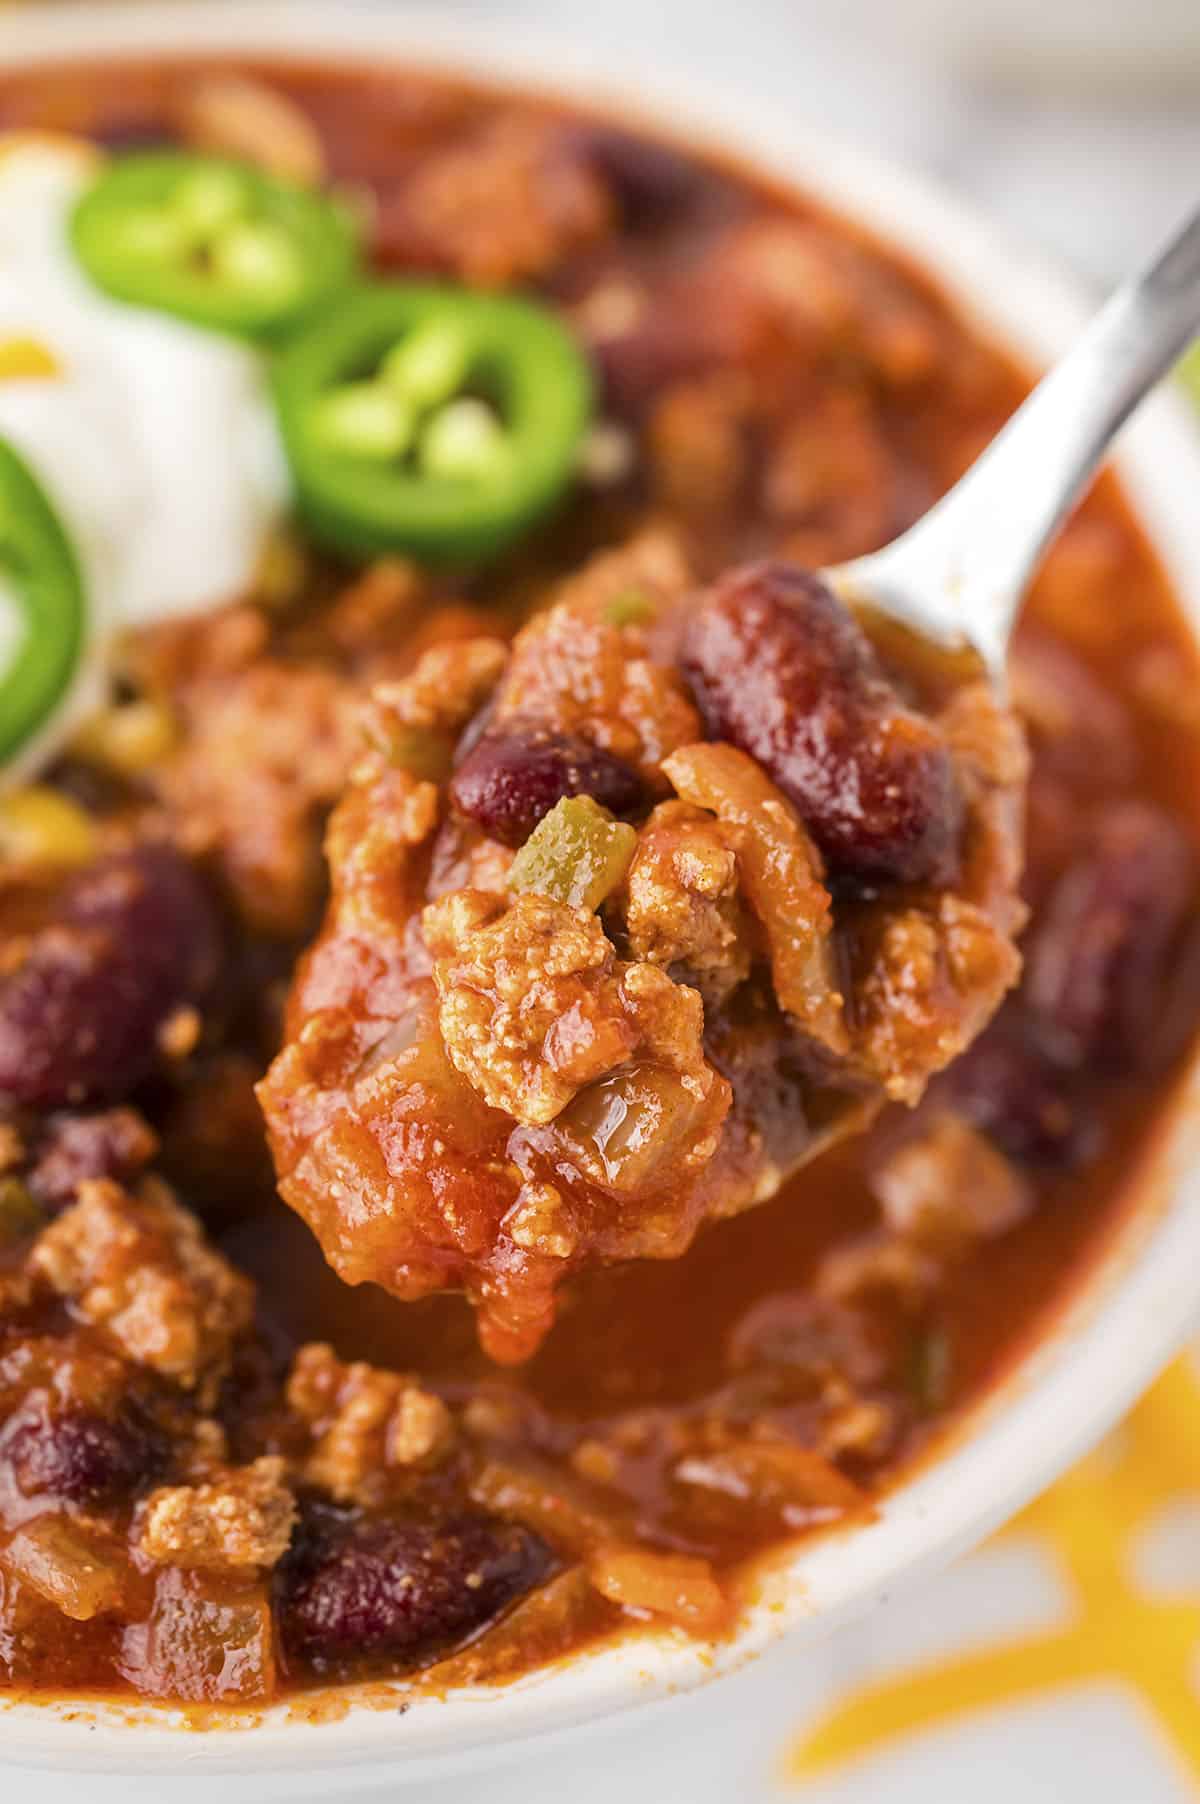 A spoonful of chili held up to the camera above a bowl of chili.